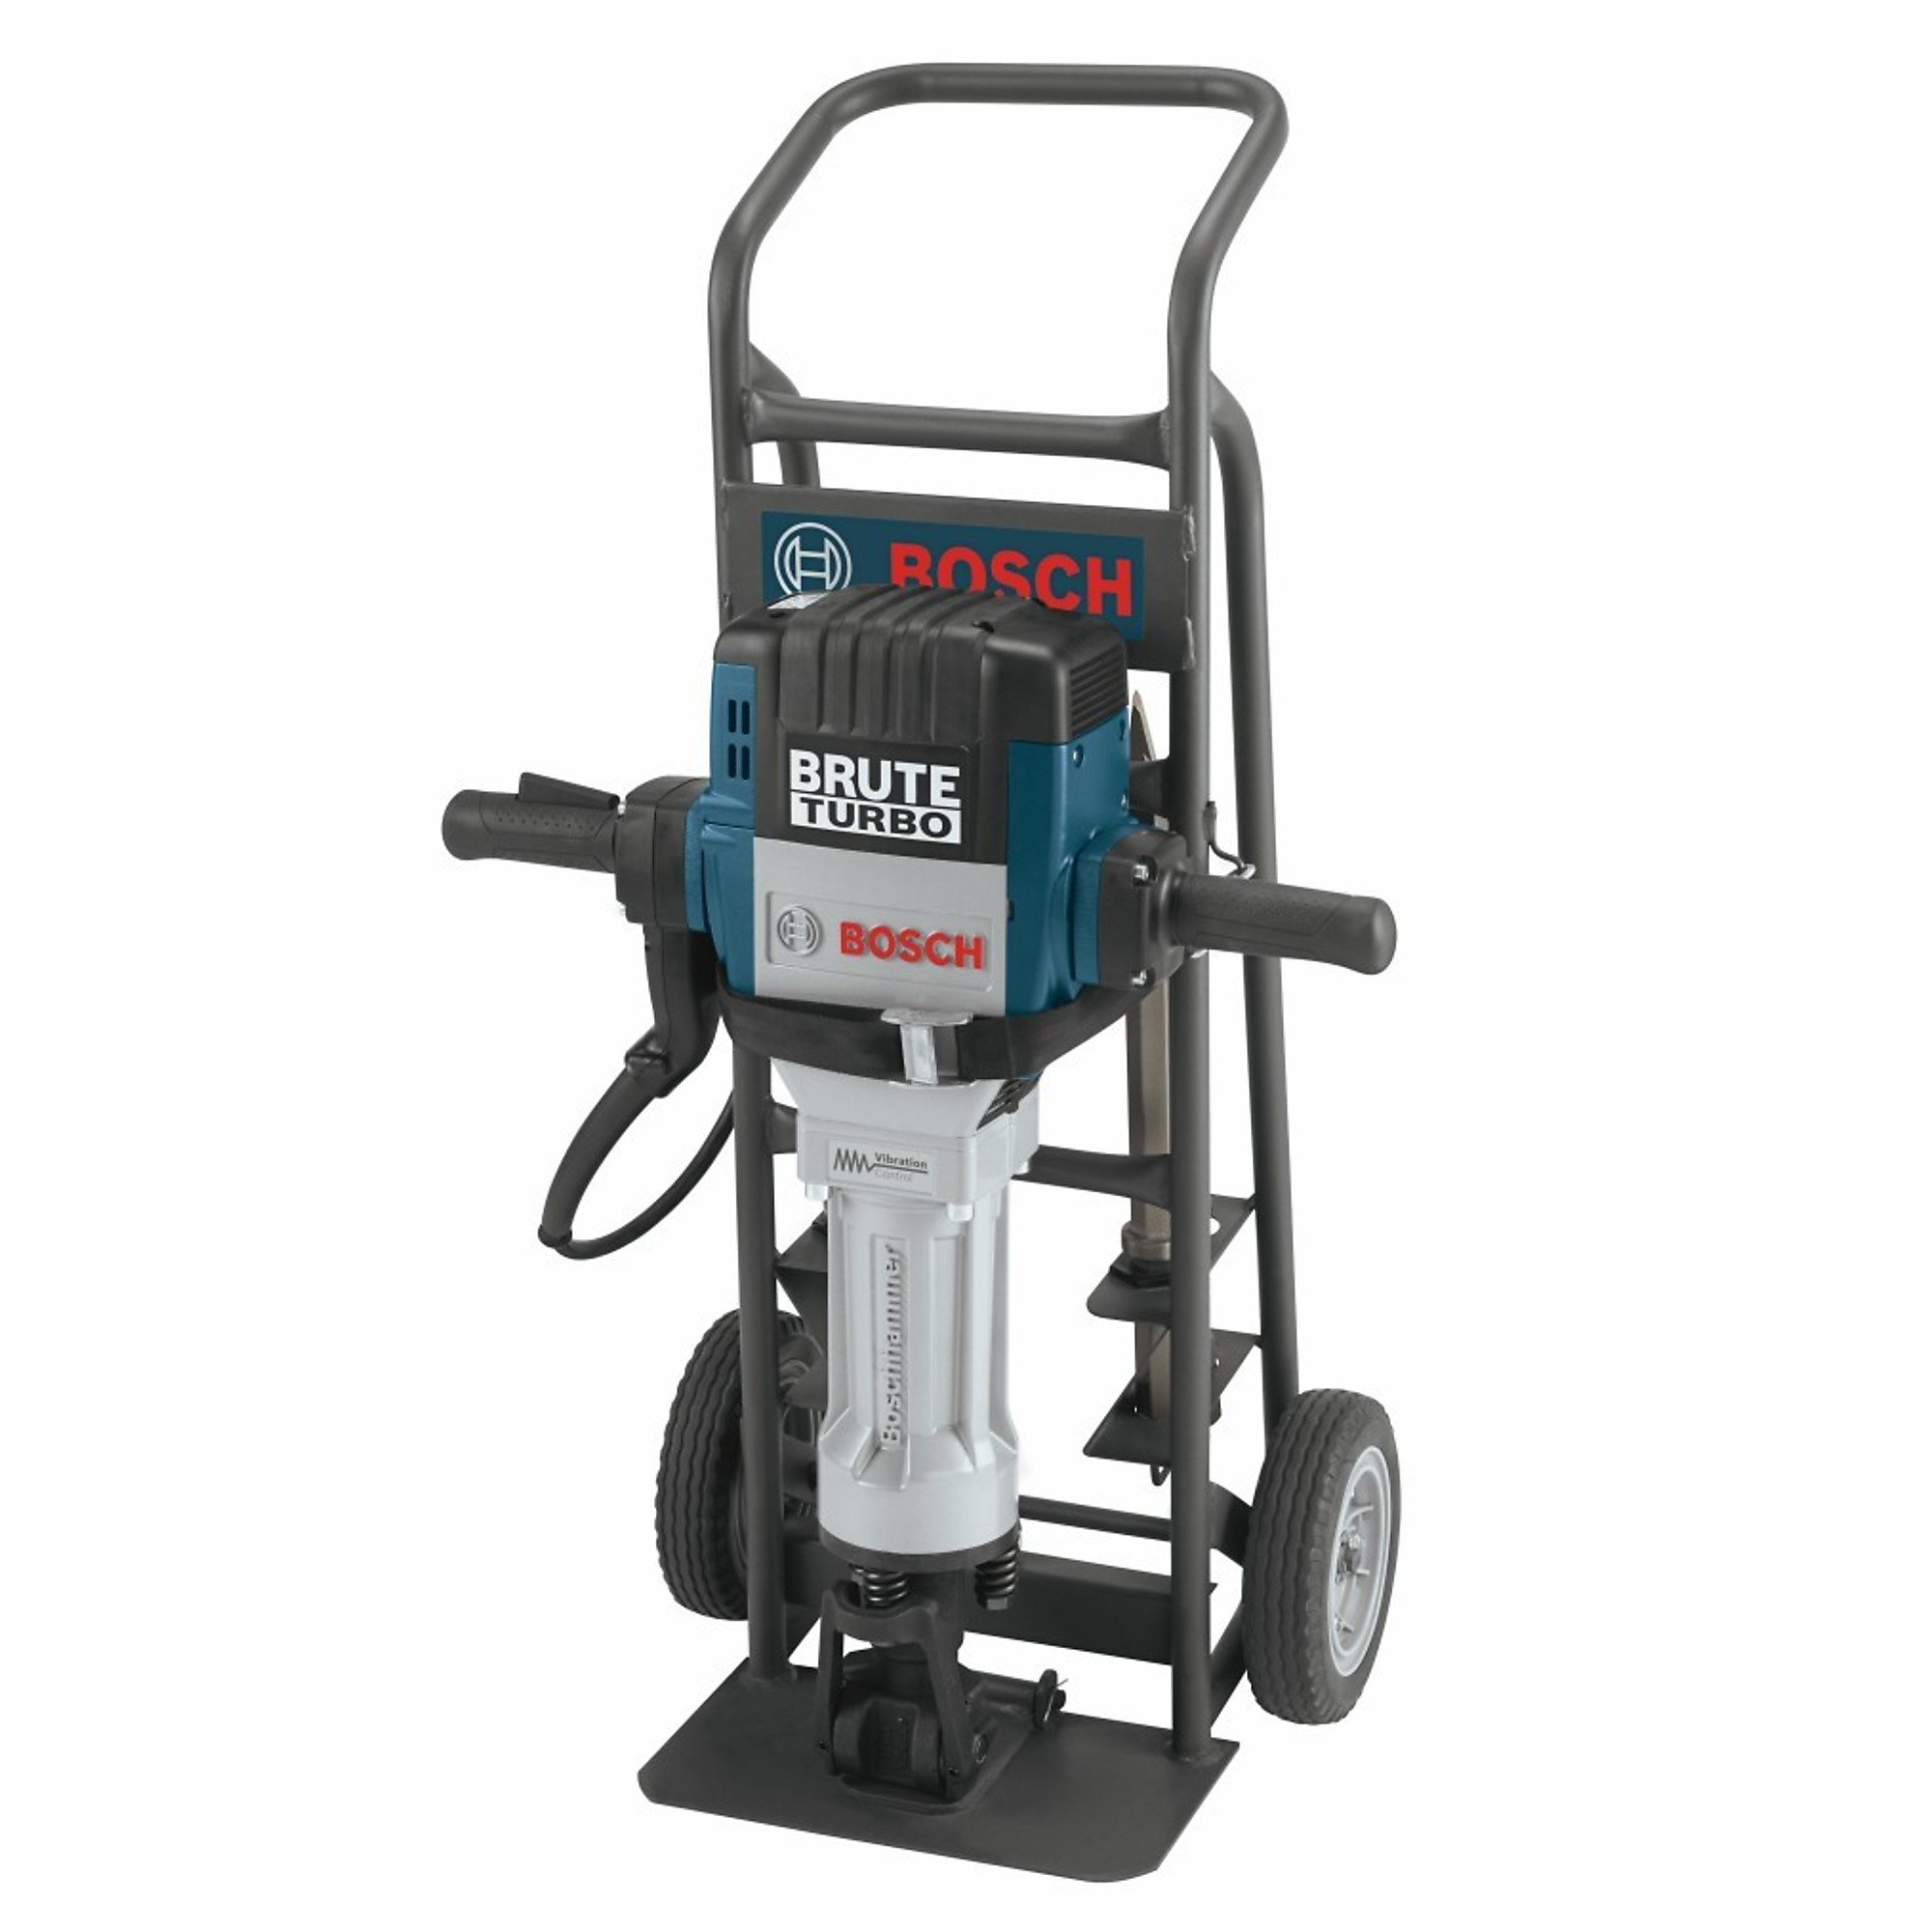 Bosch, Brute Turbo Breaker Hammer with Deluxe Cart, Amps 15, Volts 120, Max. Blows Per Minute 1000, Model BH2770VCD